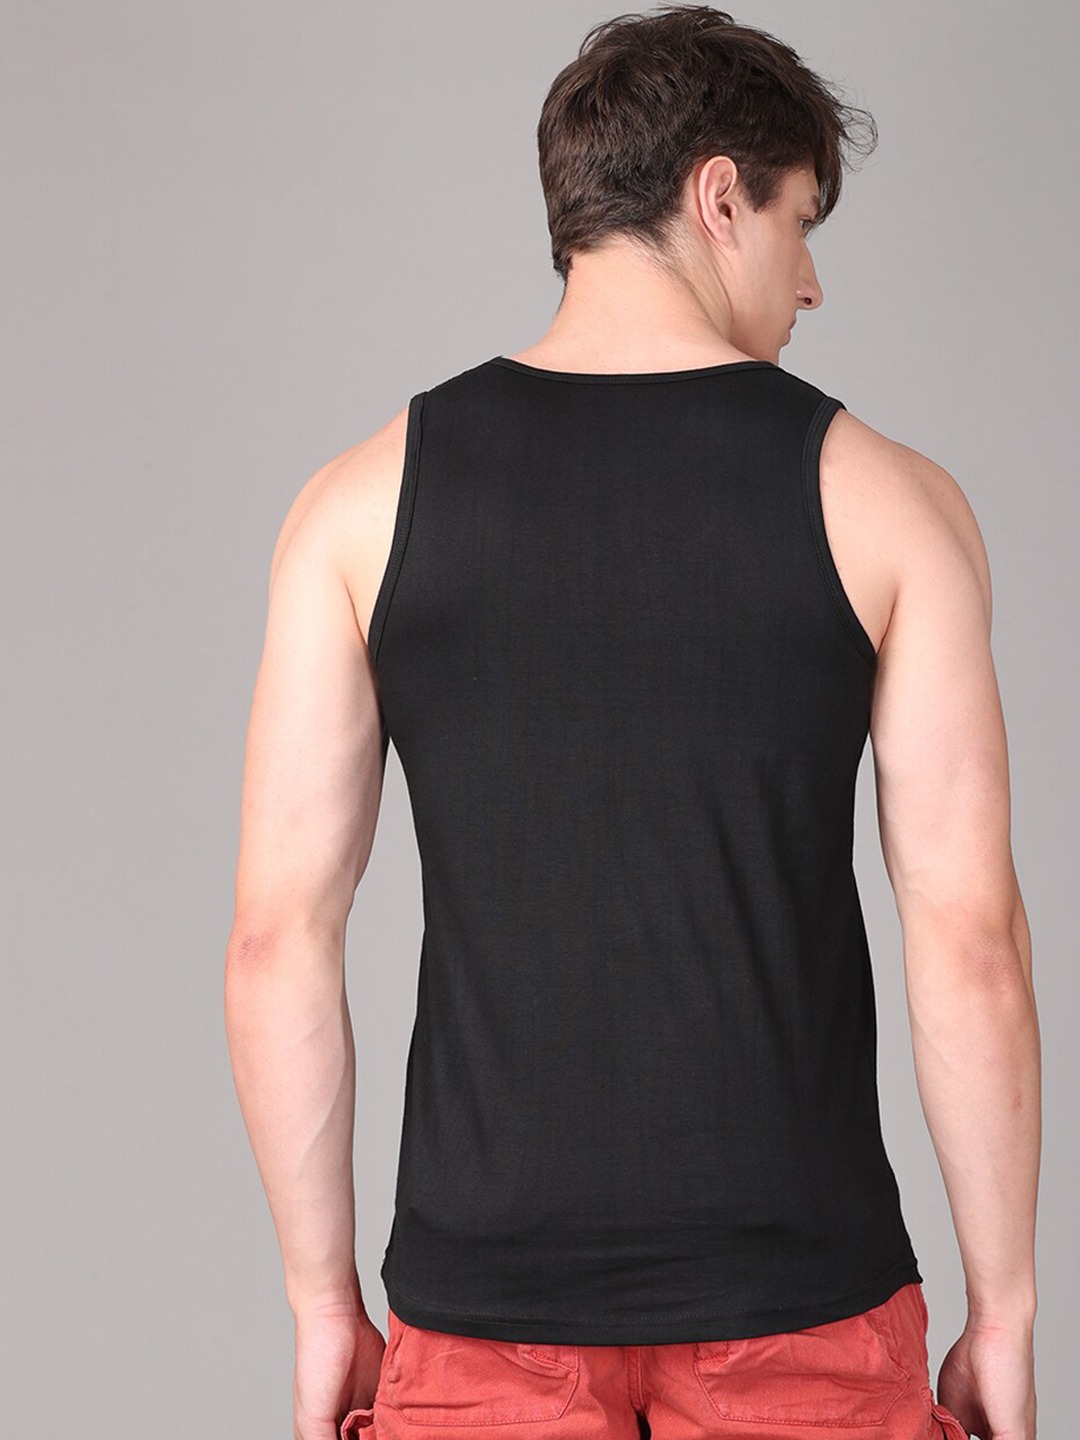 Clothing Innerwear Vests | IMYOUNG Men Black & Charcoal Typography Printed Innerwear Vests - XP00627